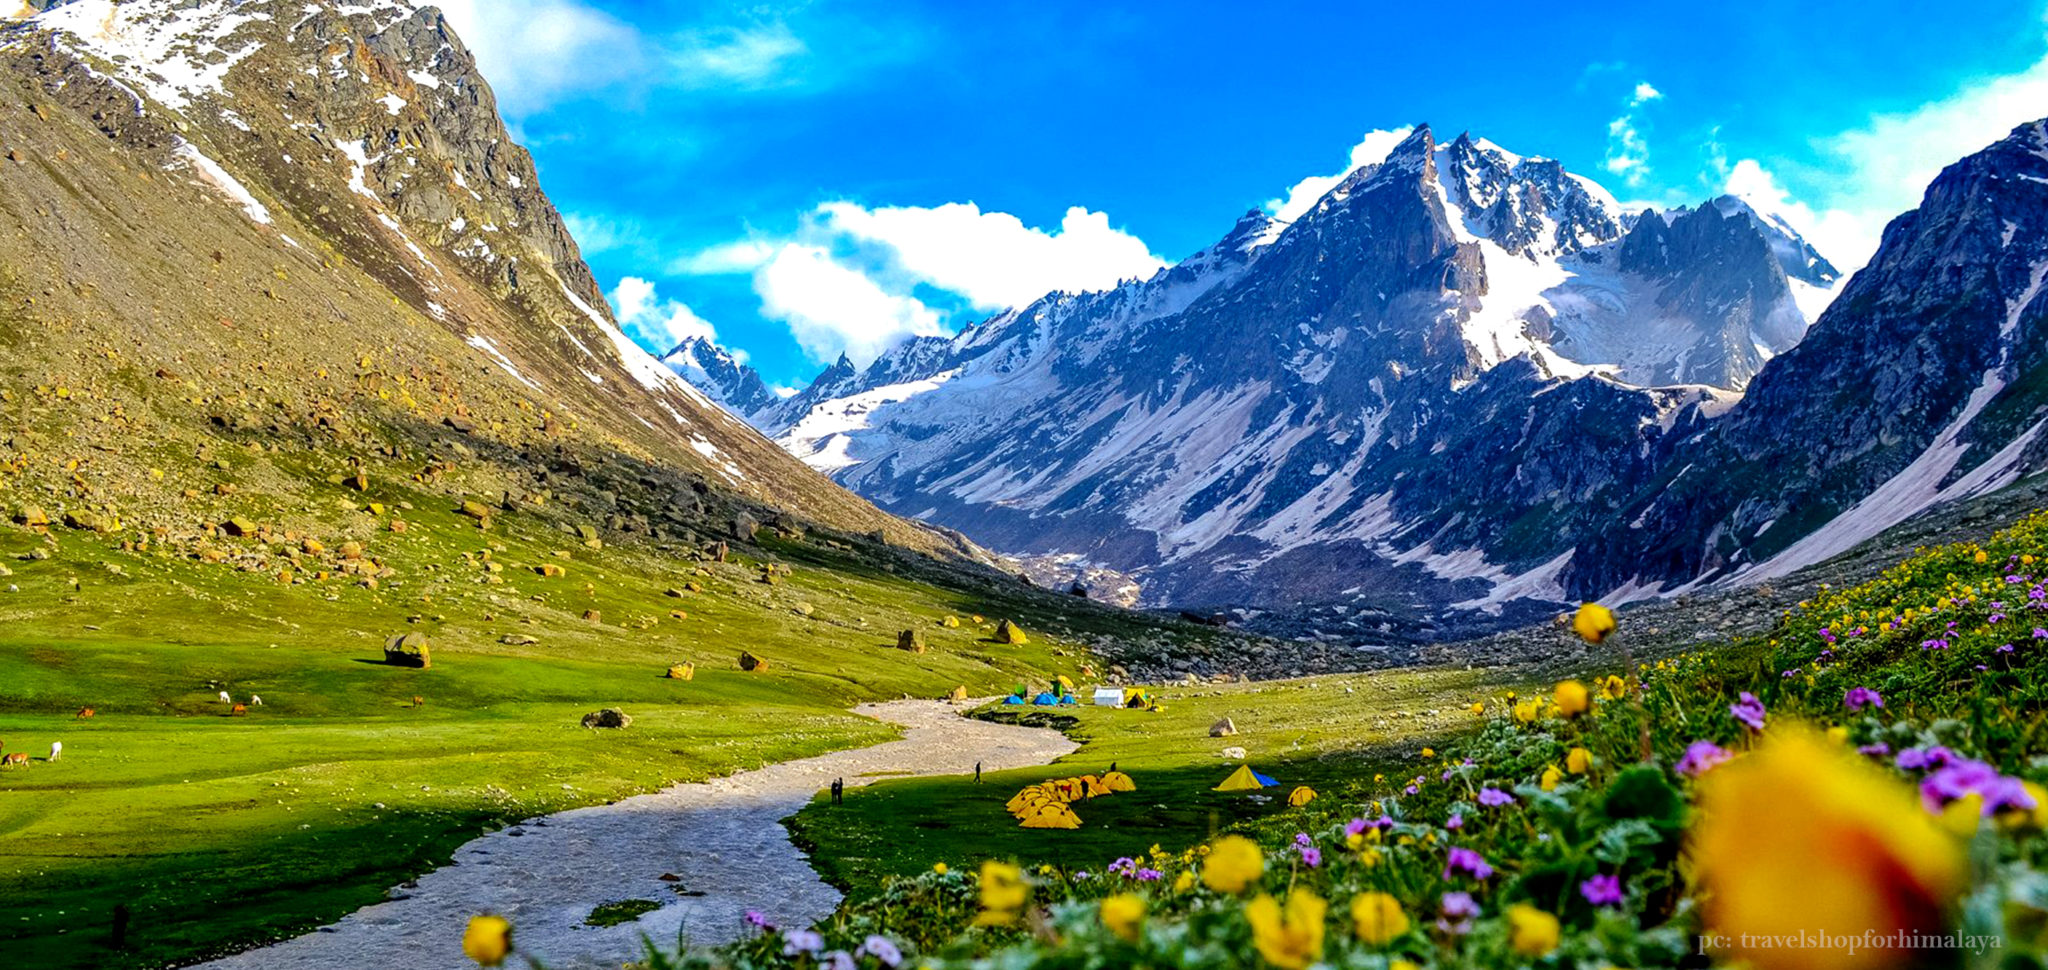 Search The Himalayas With This Top 10 Guide To Hampta Pass Trek